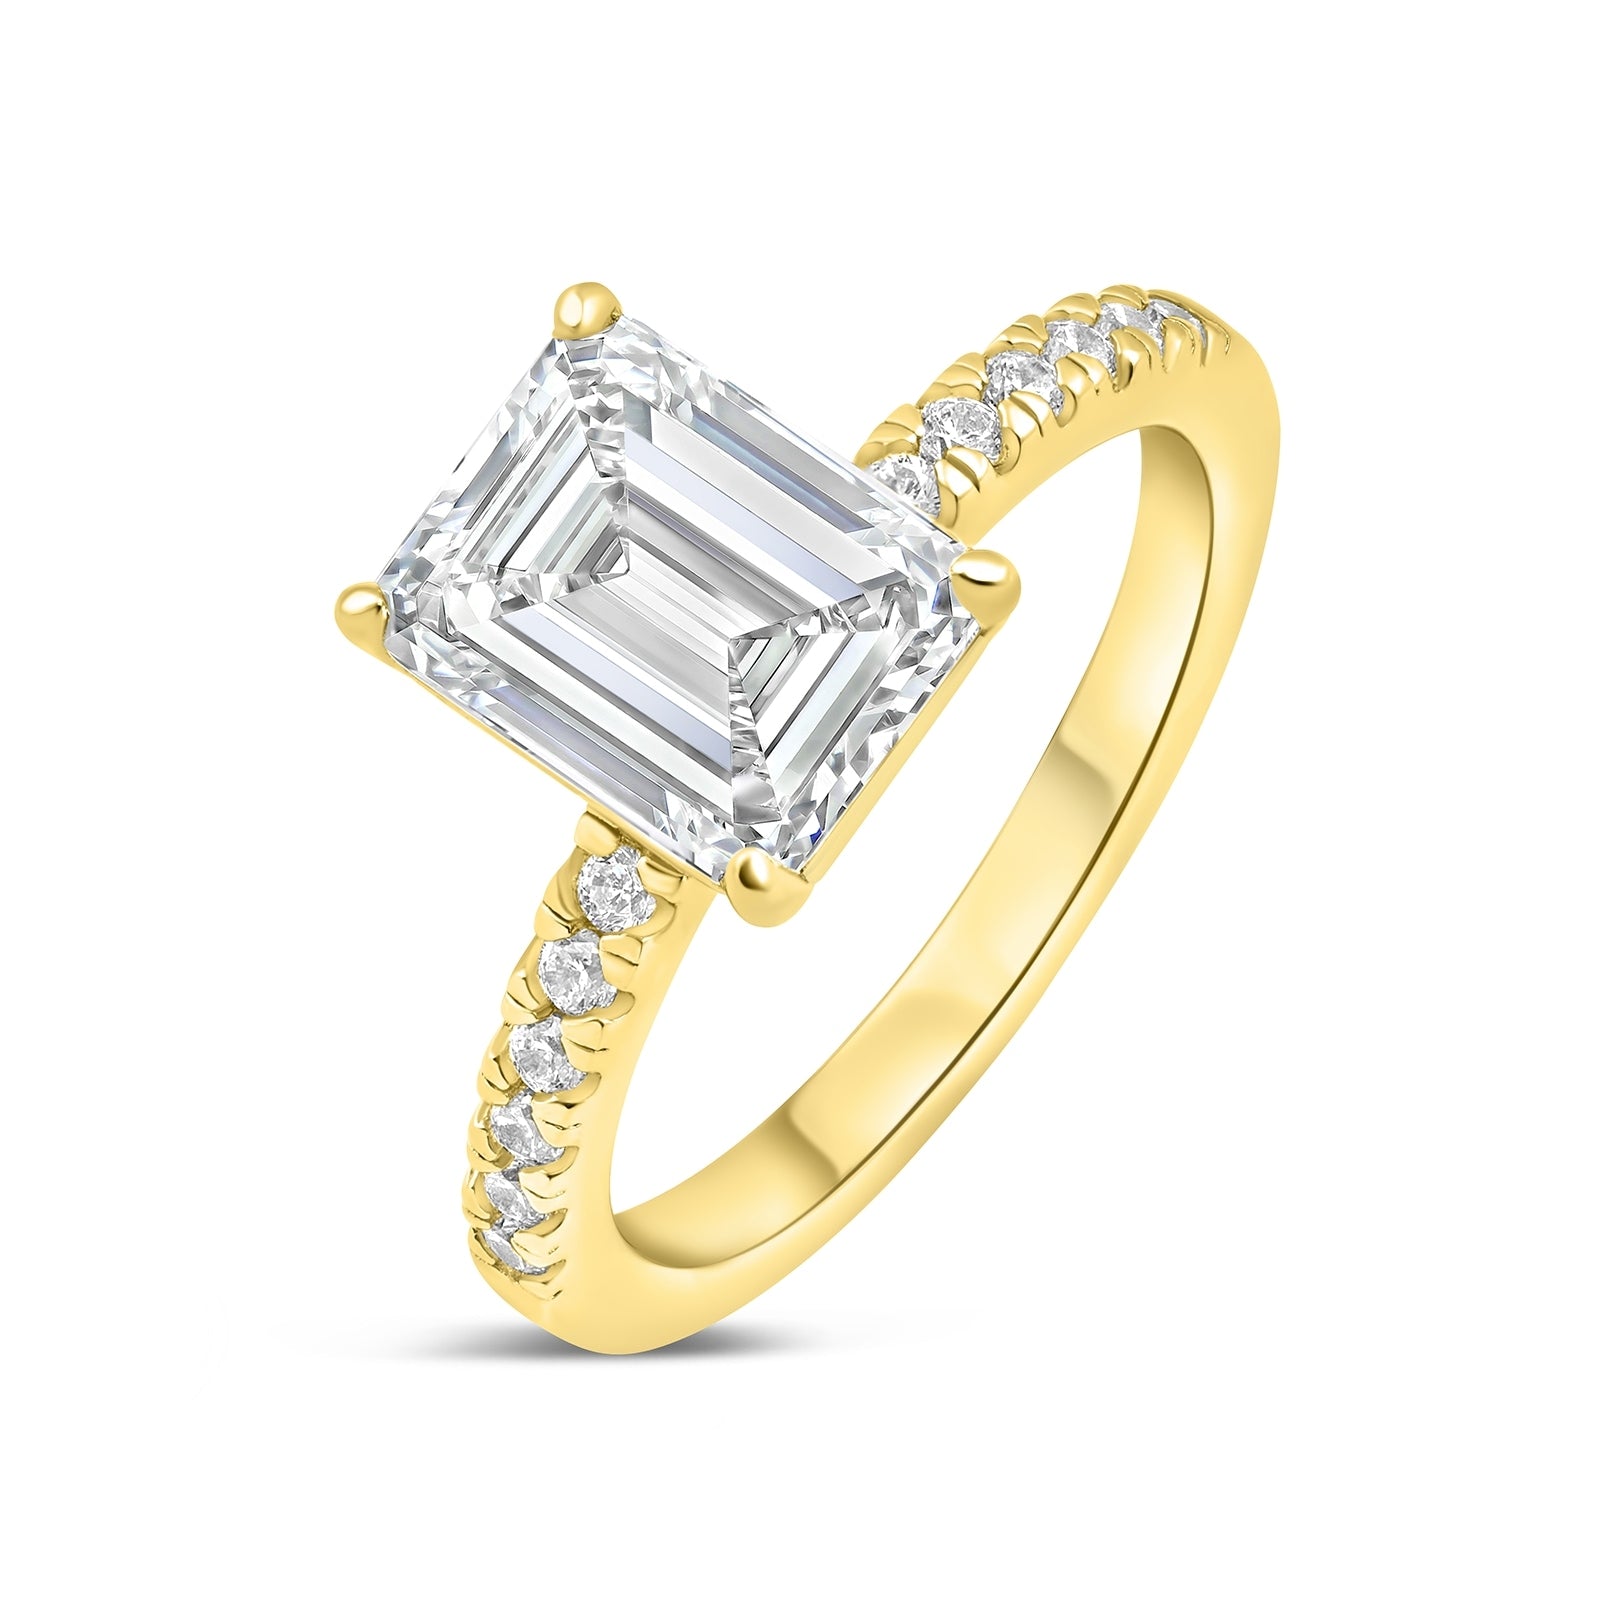 gold 3 carat emerald cut engagement ring with a half eternity band detailing